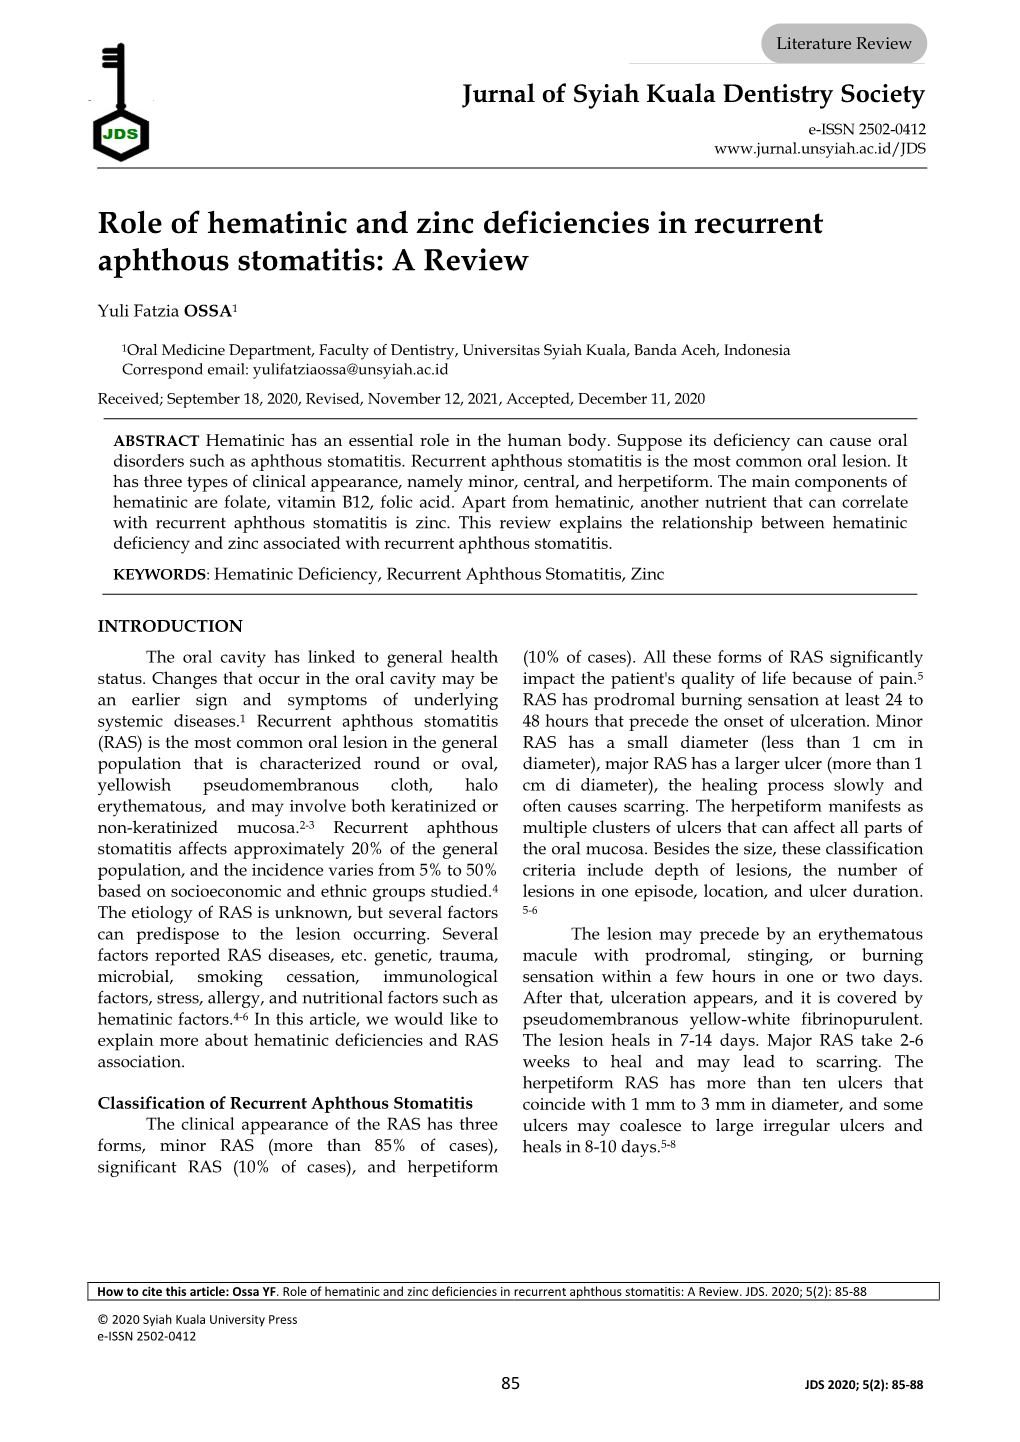 Role of Hematinic and Zinc Deficiencies in Recurrent Aphthous Stomatitis: a Review